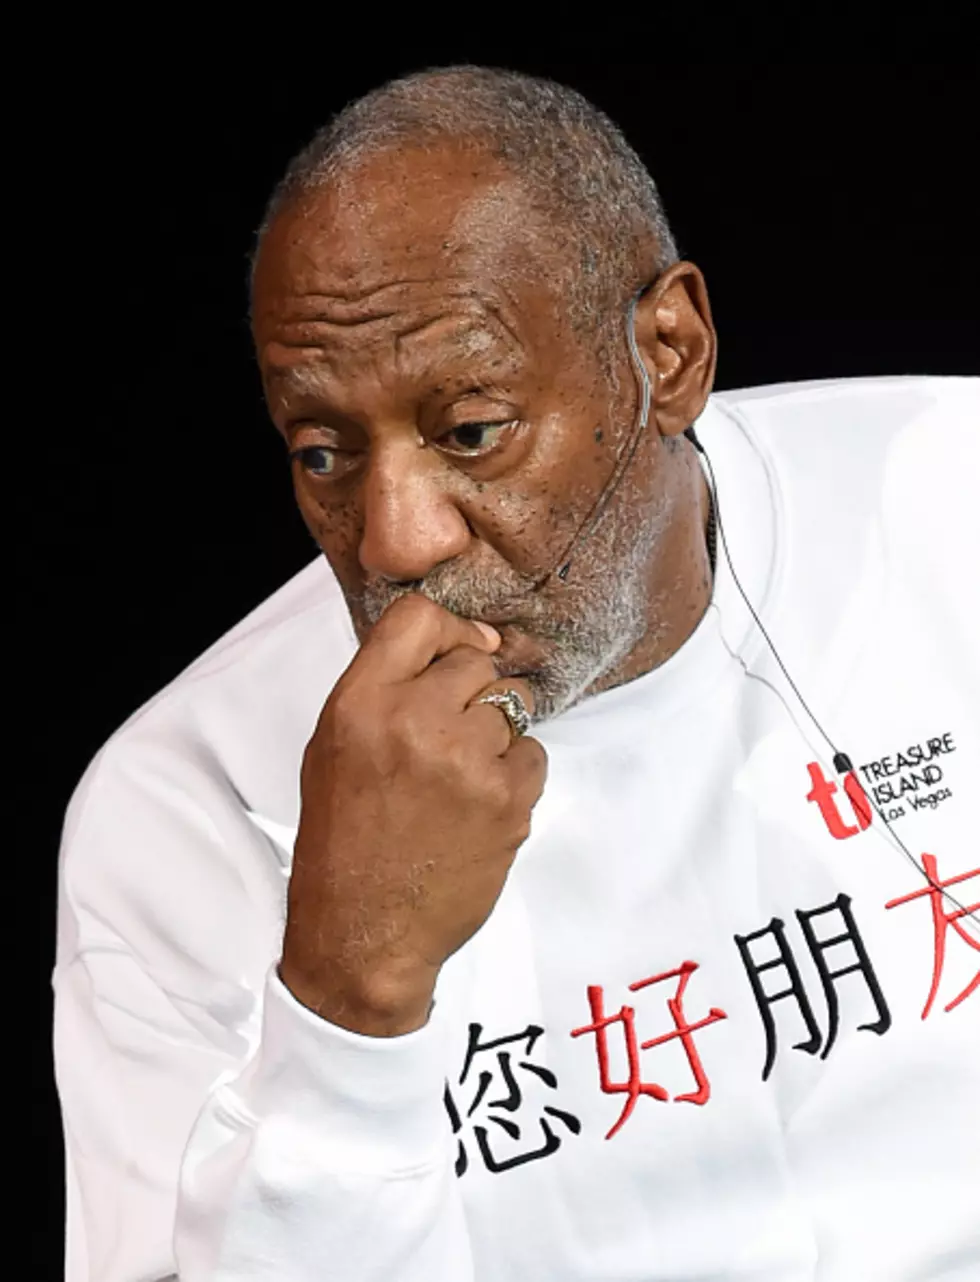 Bill Cosby Reaches Out to Fans In Bizarre New Clip [Video]